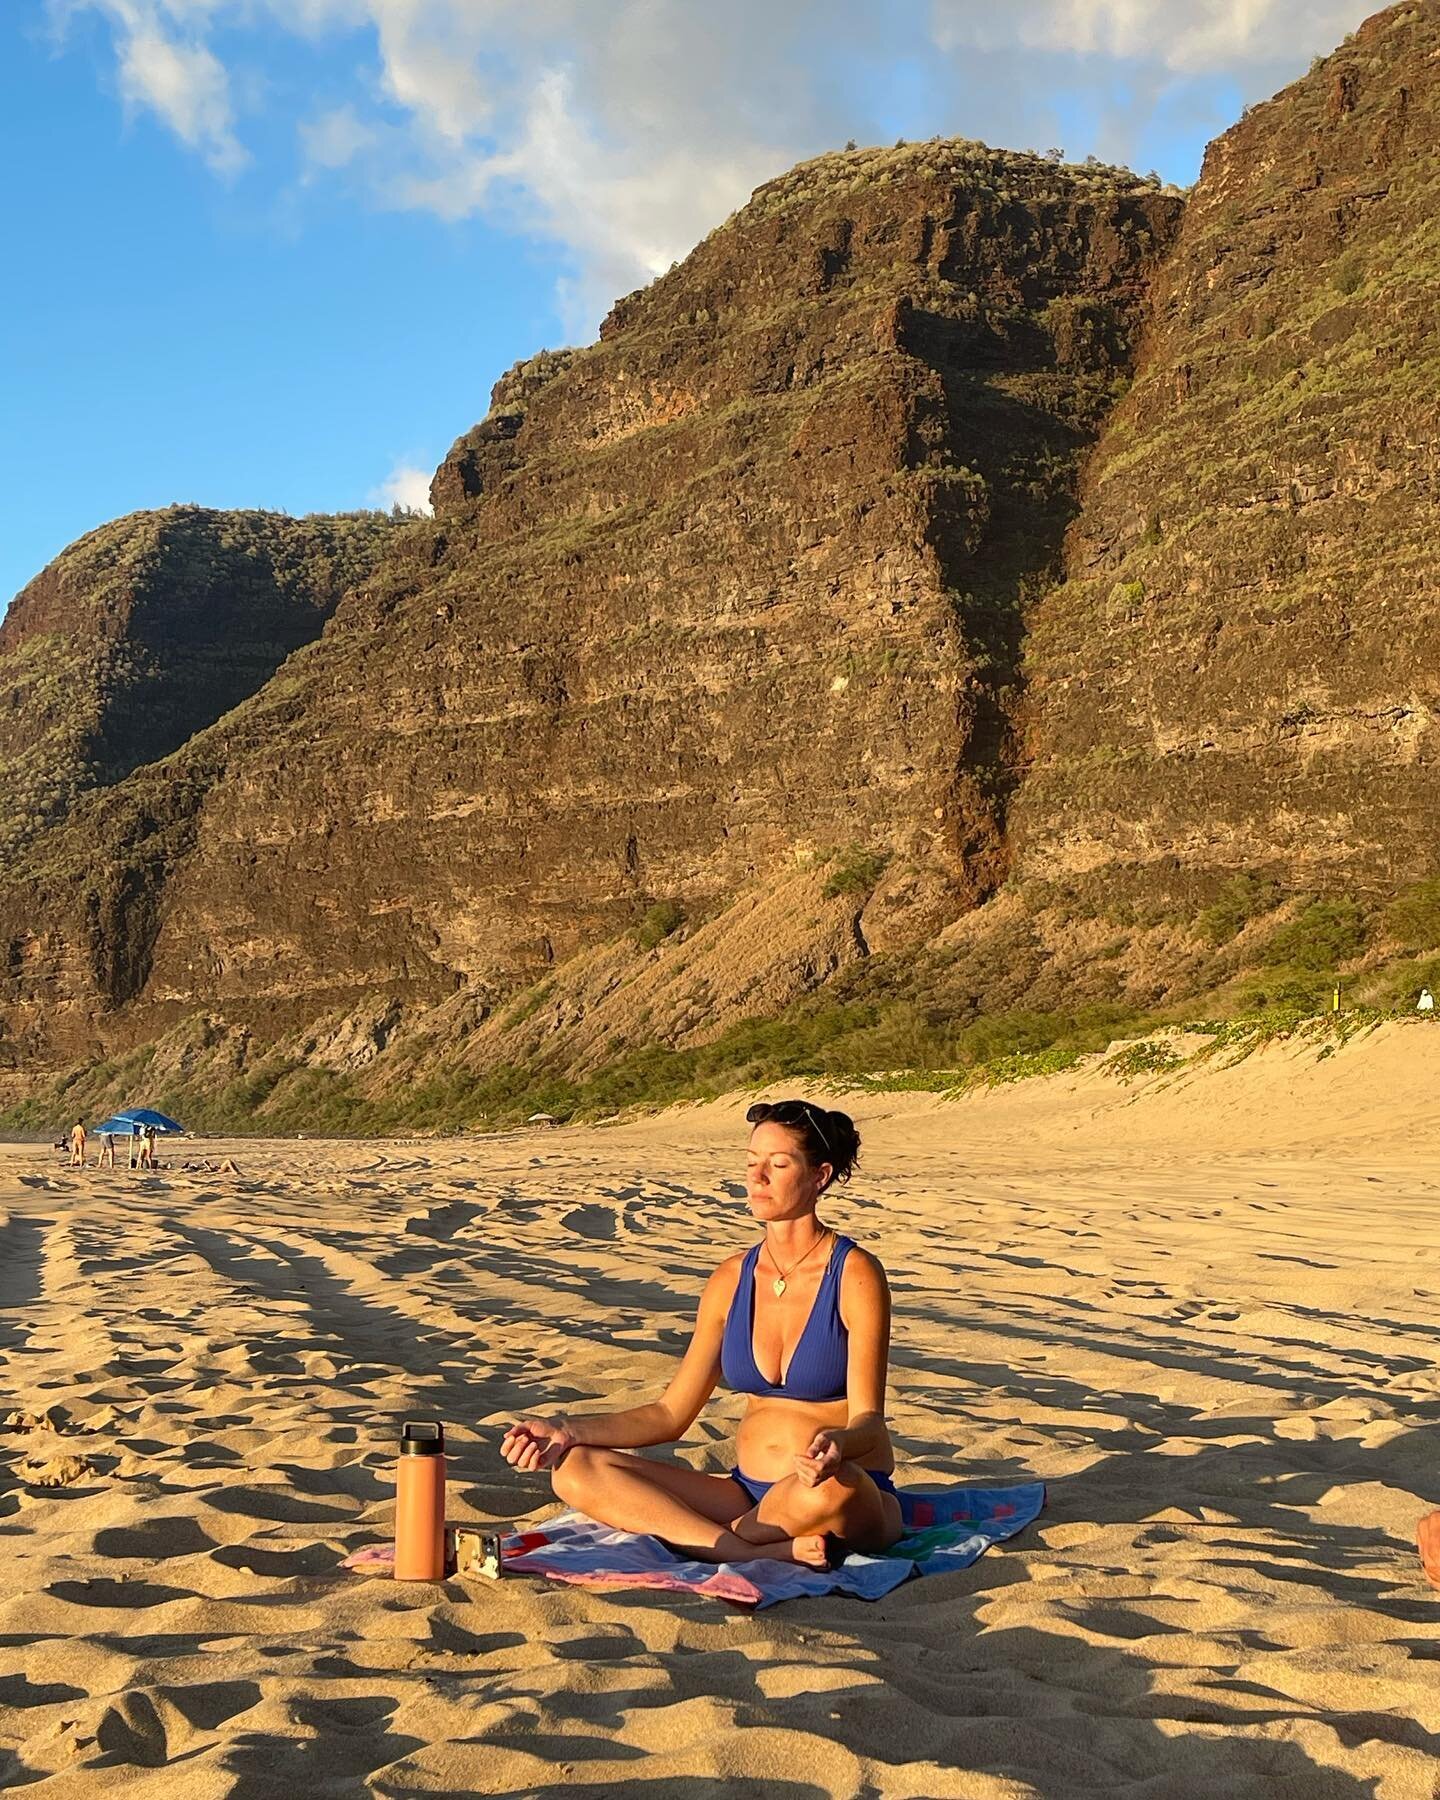 We&rsquo;ve been meditating all over this island. In July we had the opportunity to go to Polihale with friends where we were graced by no rain, clouds, &amp; a new moon. So the cosmic sky was able to be seen in an epic way. I felt like I was floatin